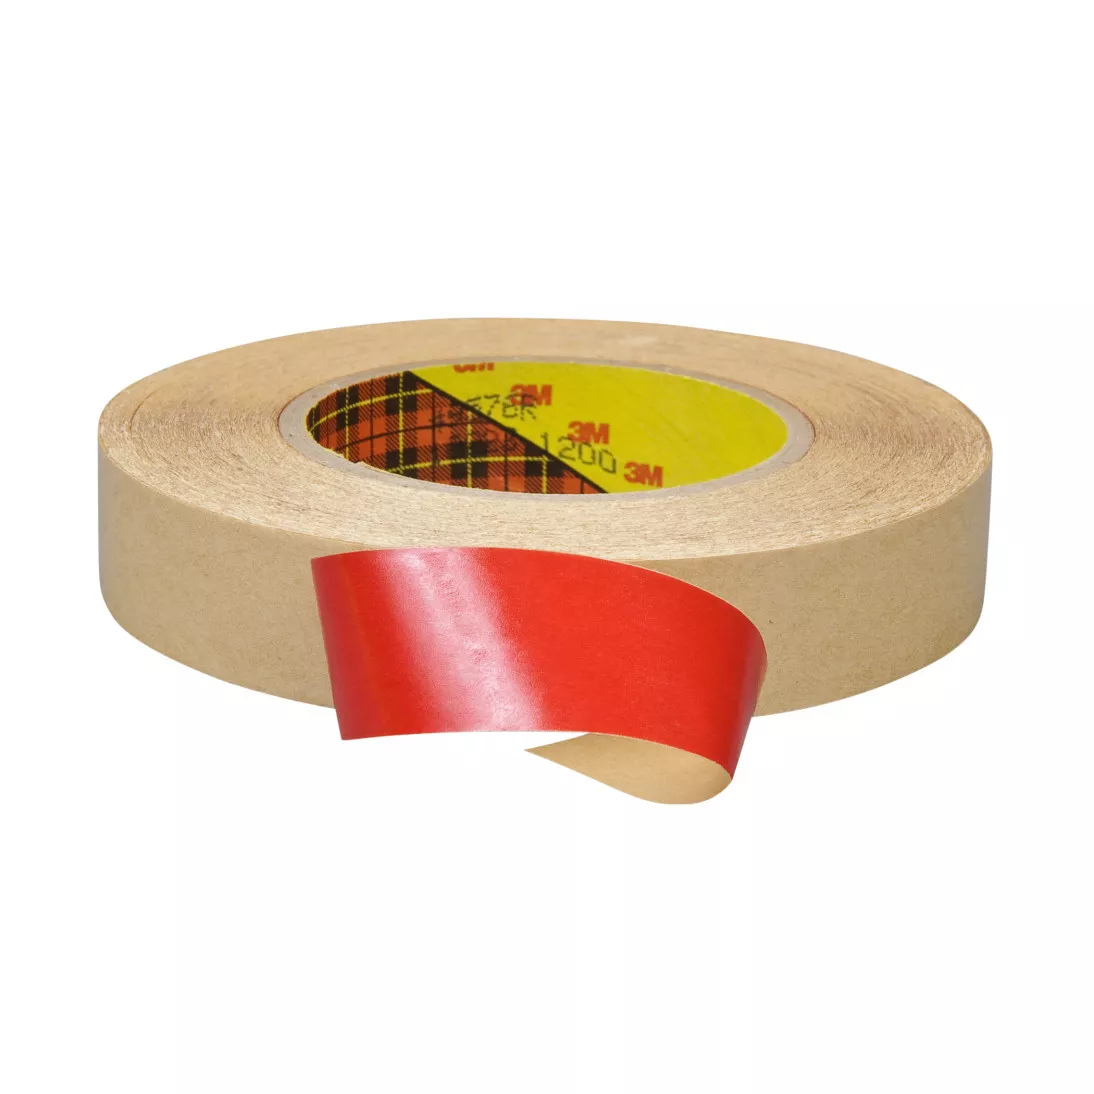 3M™ Double Coated Tape 9576R, Red, 2 in x 60 yd, 4 mil, 24 rolls per
case